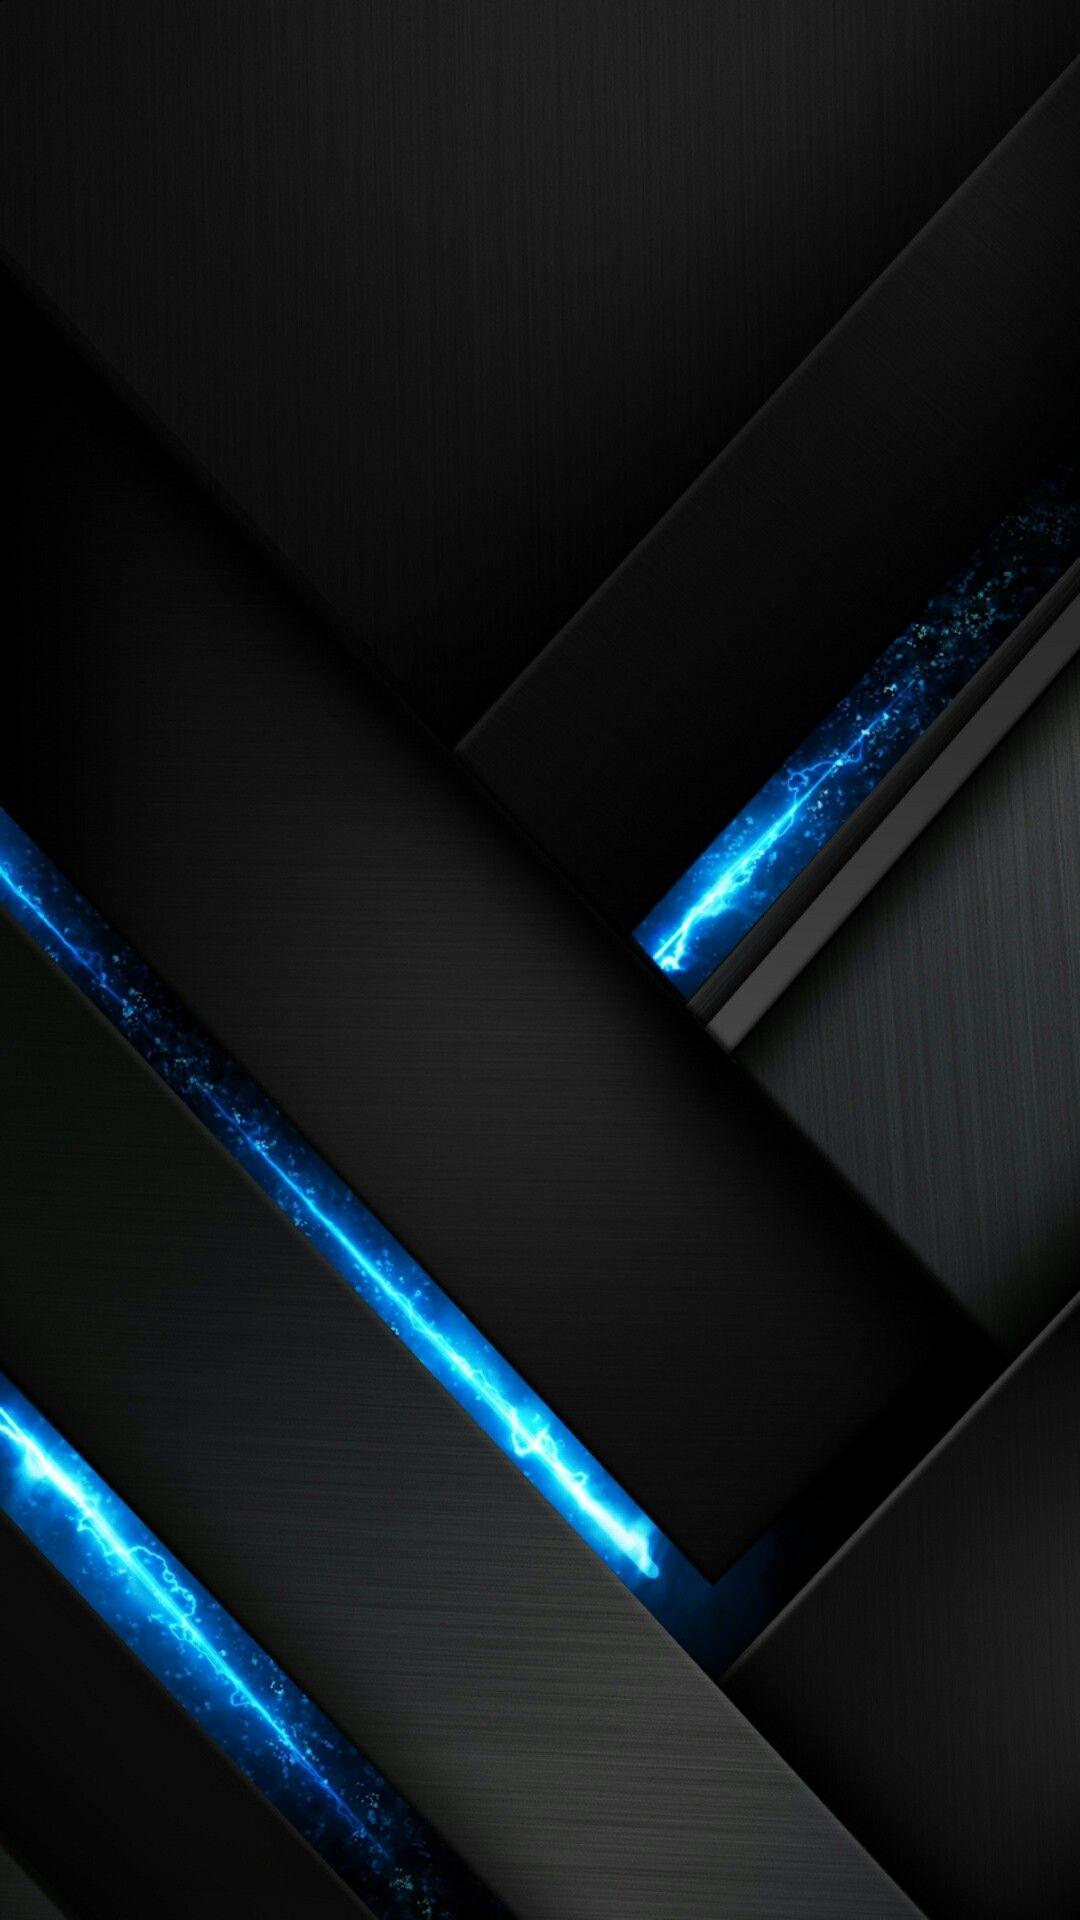 Black and Blue Abstract Wallpaper. *Abstract and Geometric